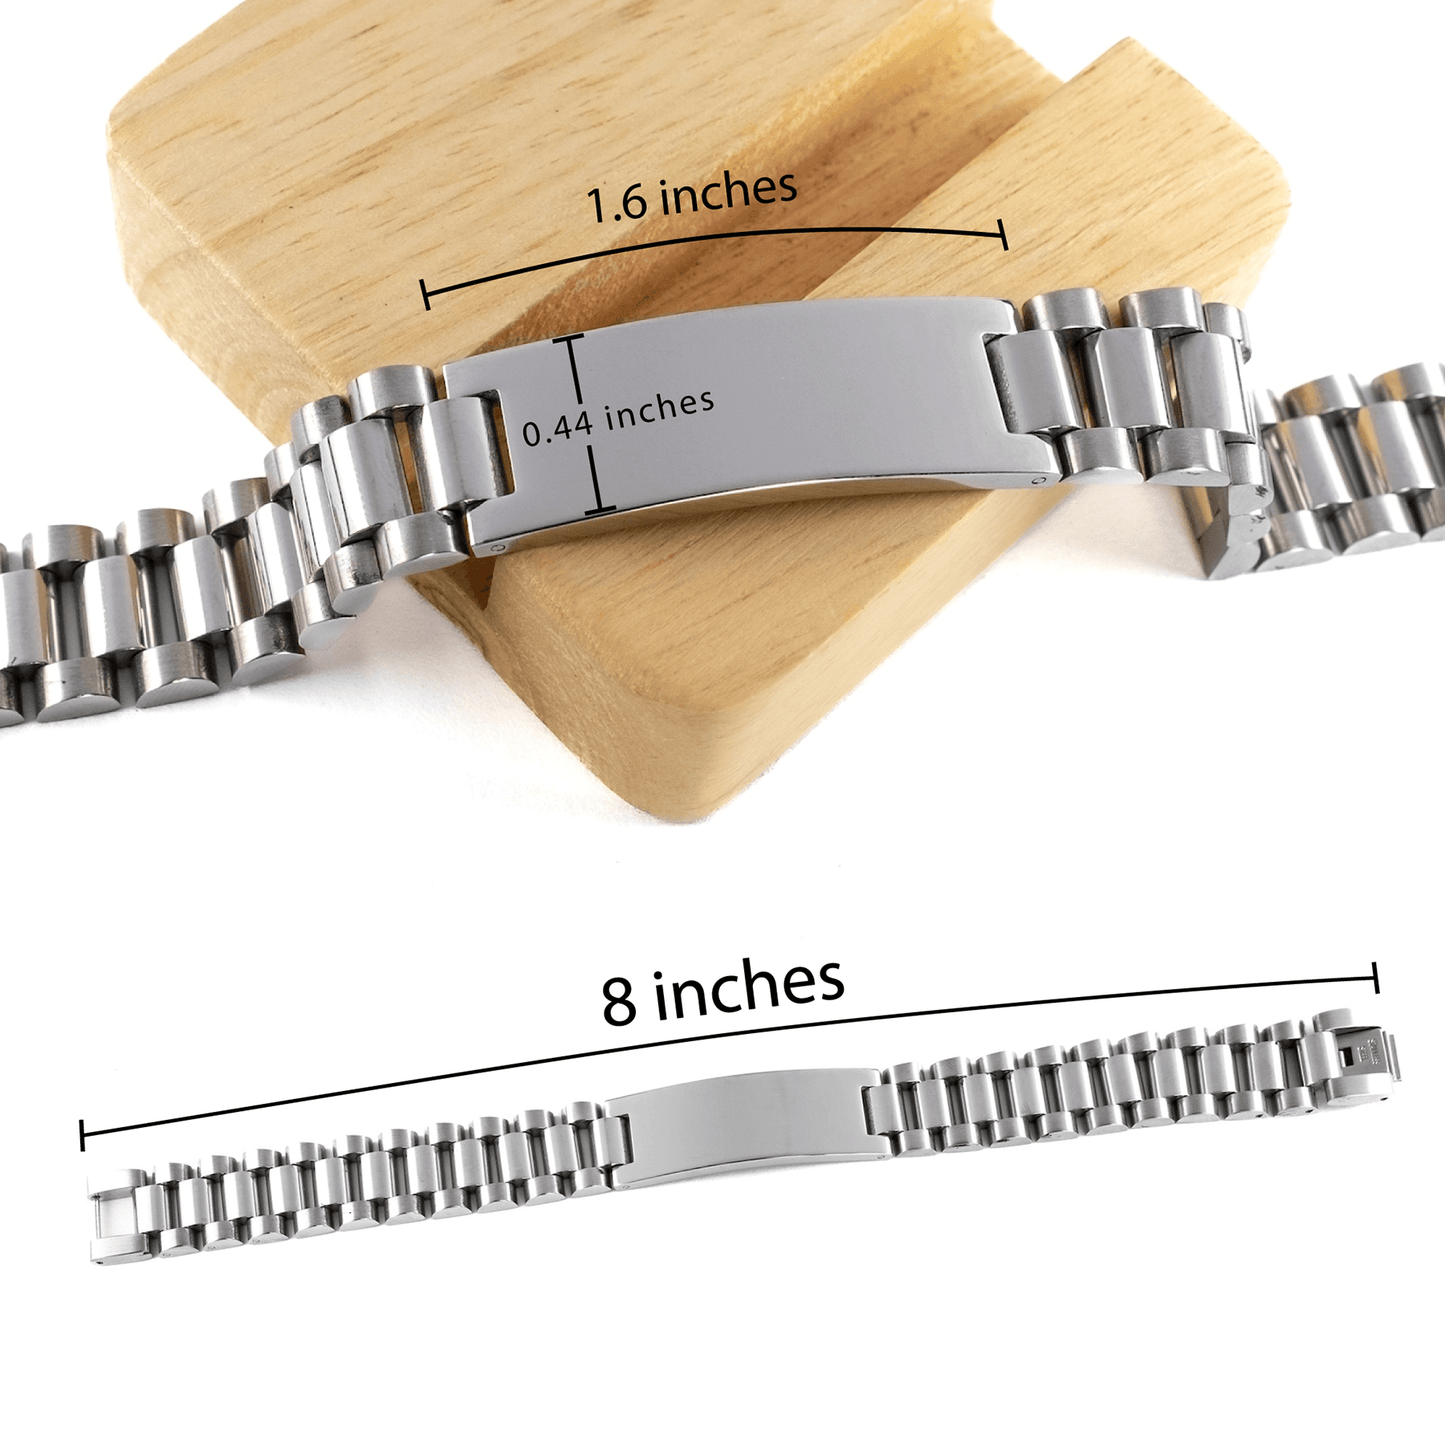 Carpenter Ladder Stainless Steel Engraved Bracelet - Thanks for being who you are - Birthday Christmas Jewelry Gifts Coworkers Colleague Boss - Mallard Moon Gift Shop